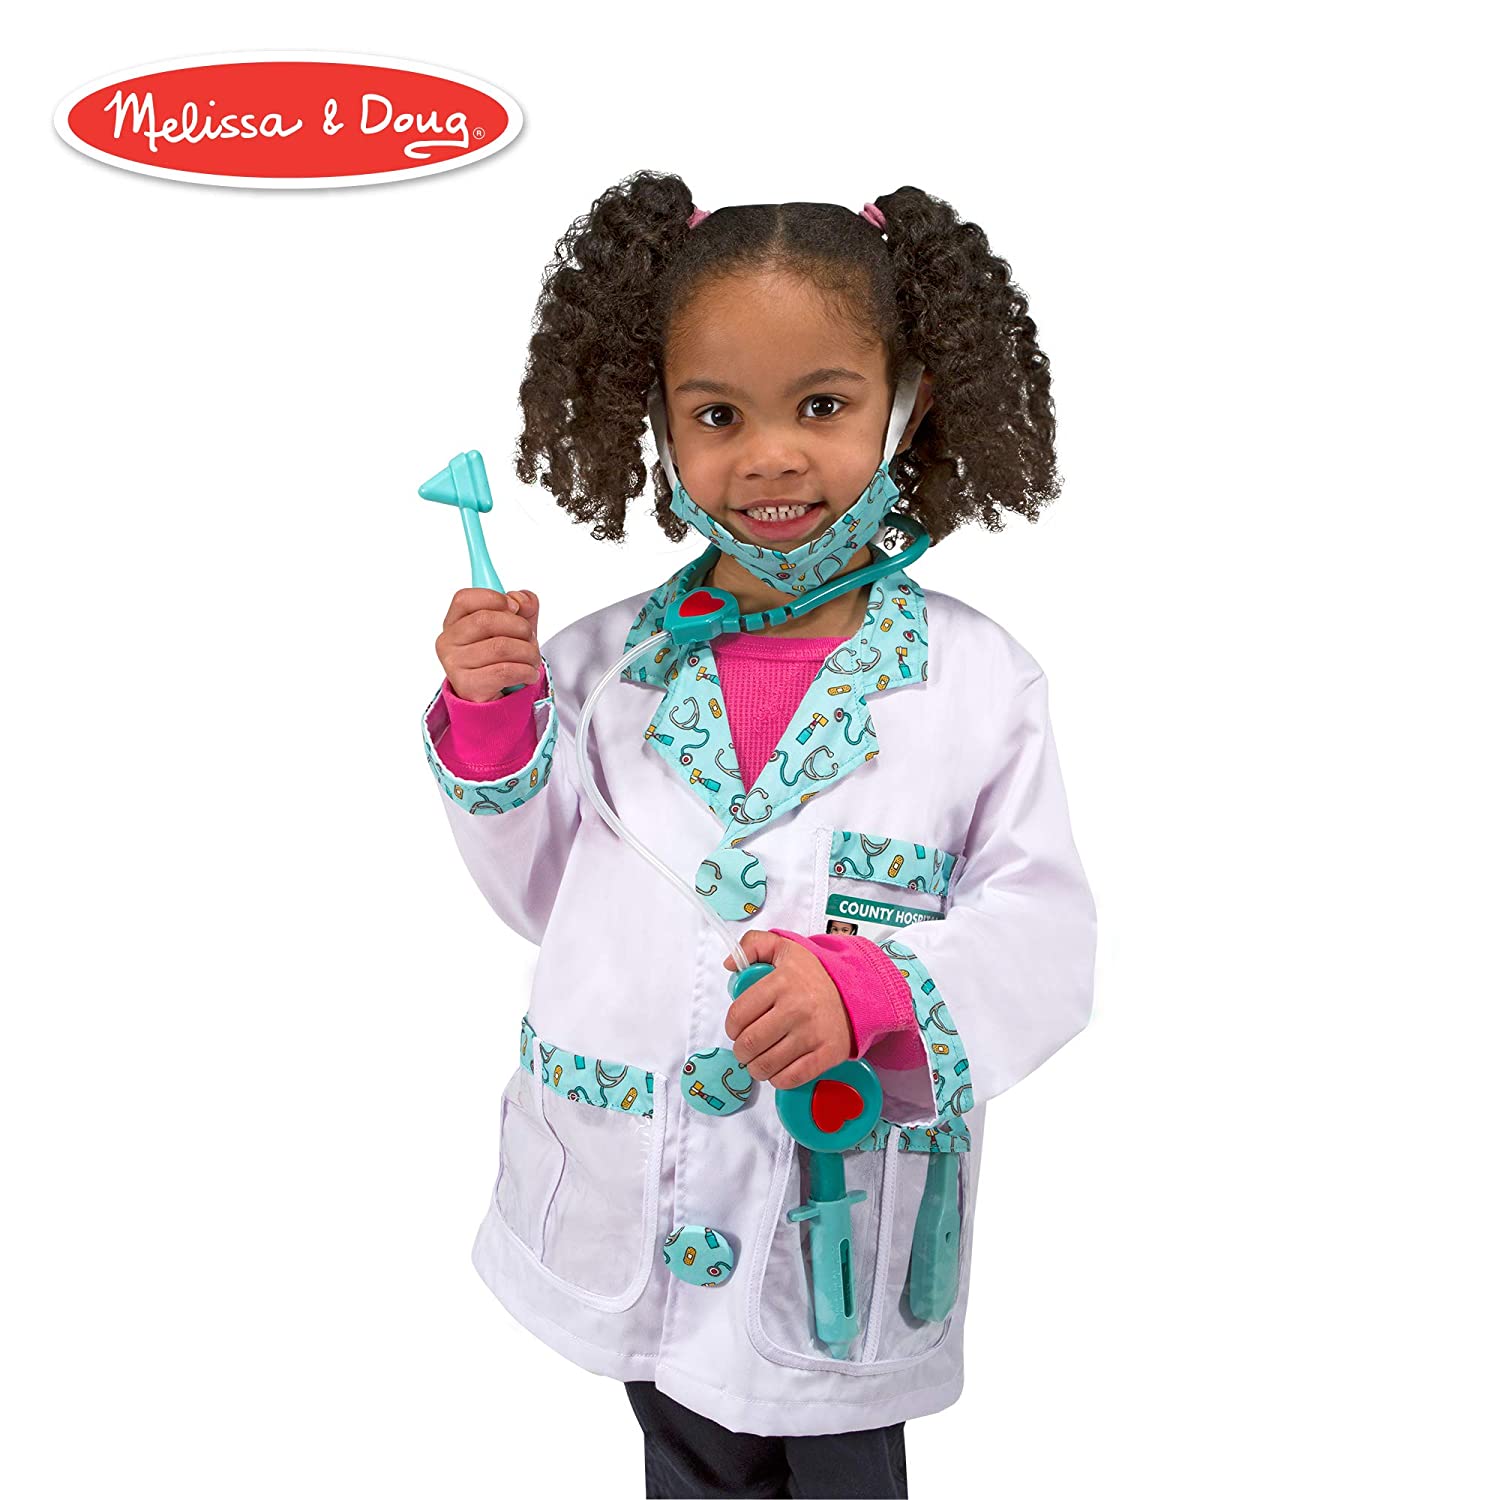 Top 9 Best Toy Doctor Kits Reviews in 2022 2